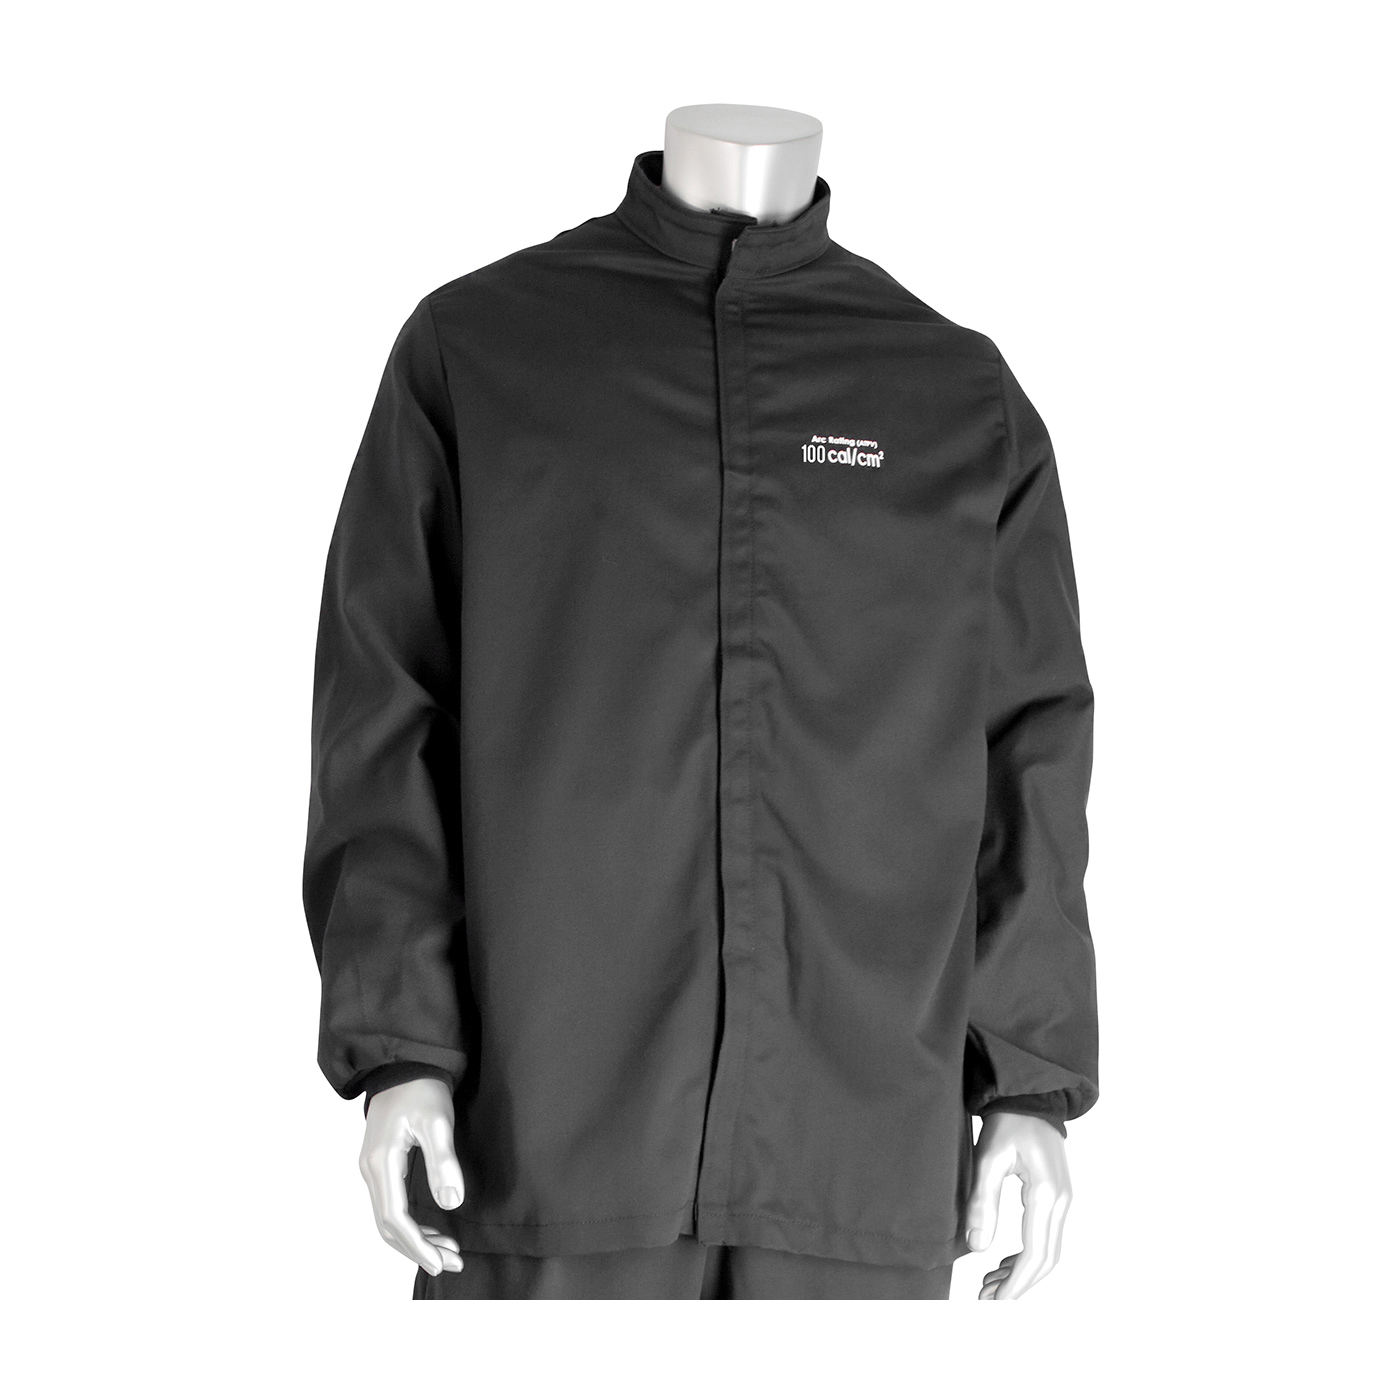 PIP® 9100-52750/4XL Arc and Flame Resistant Jacket, 4XL, Gray, Aramid/Cotton, 60 to 62 in Chest, Resists: Arc and Flame, ASTM F1506-10a, ASTM F2178-12